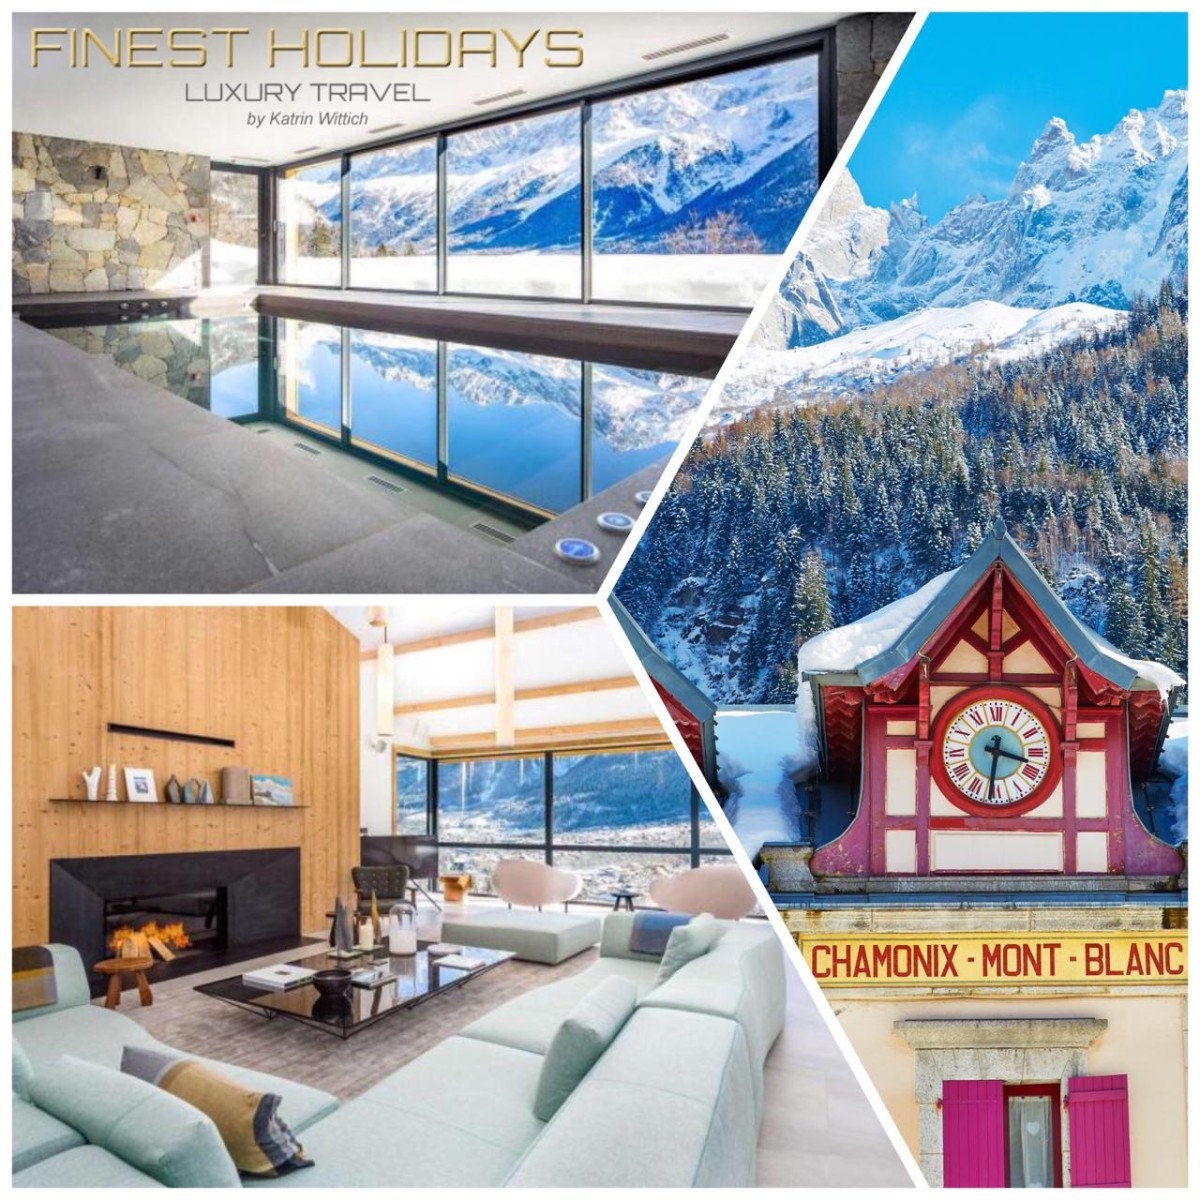 The uber luxurious Le Chalet Mont Blanc is the largest ski chalet in Chamonix